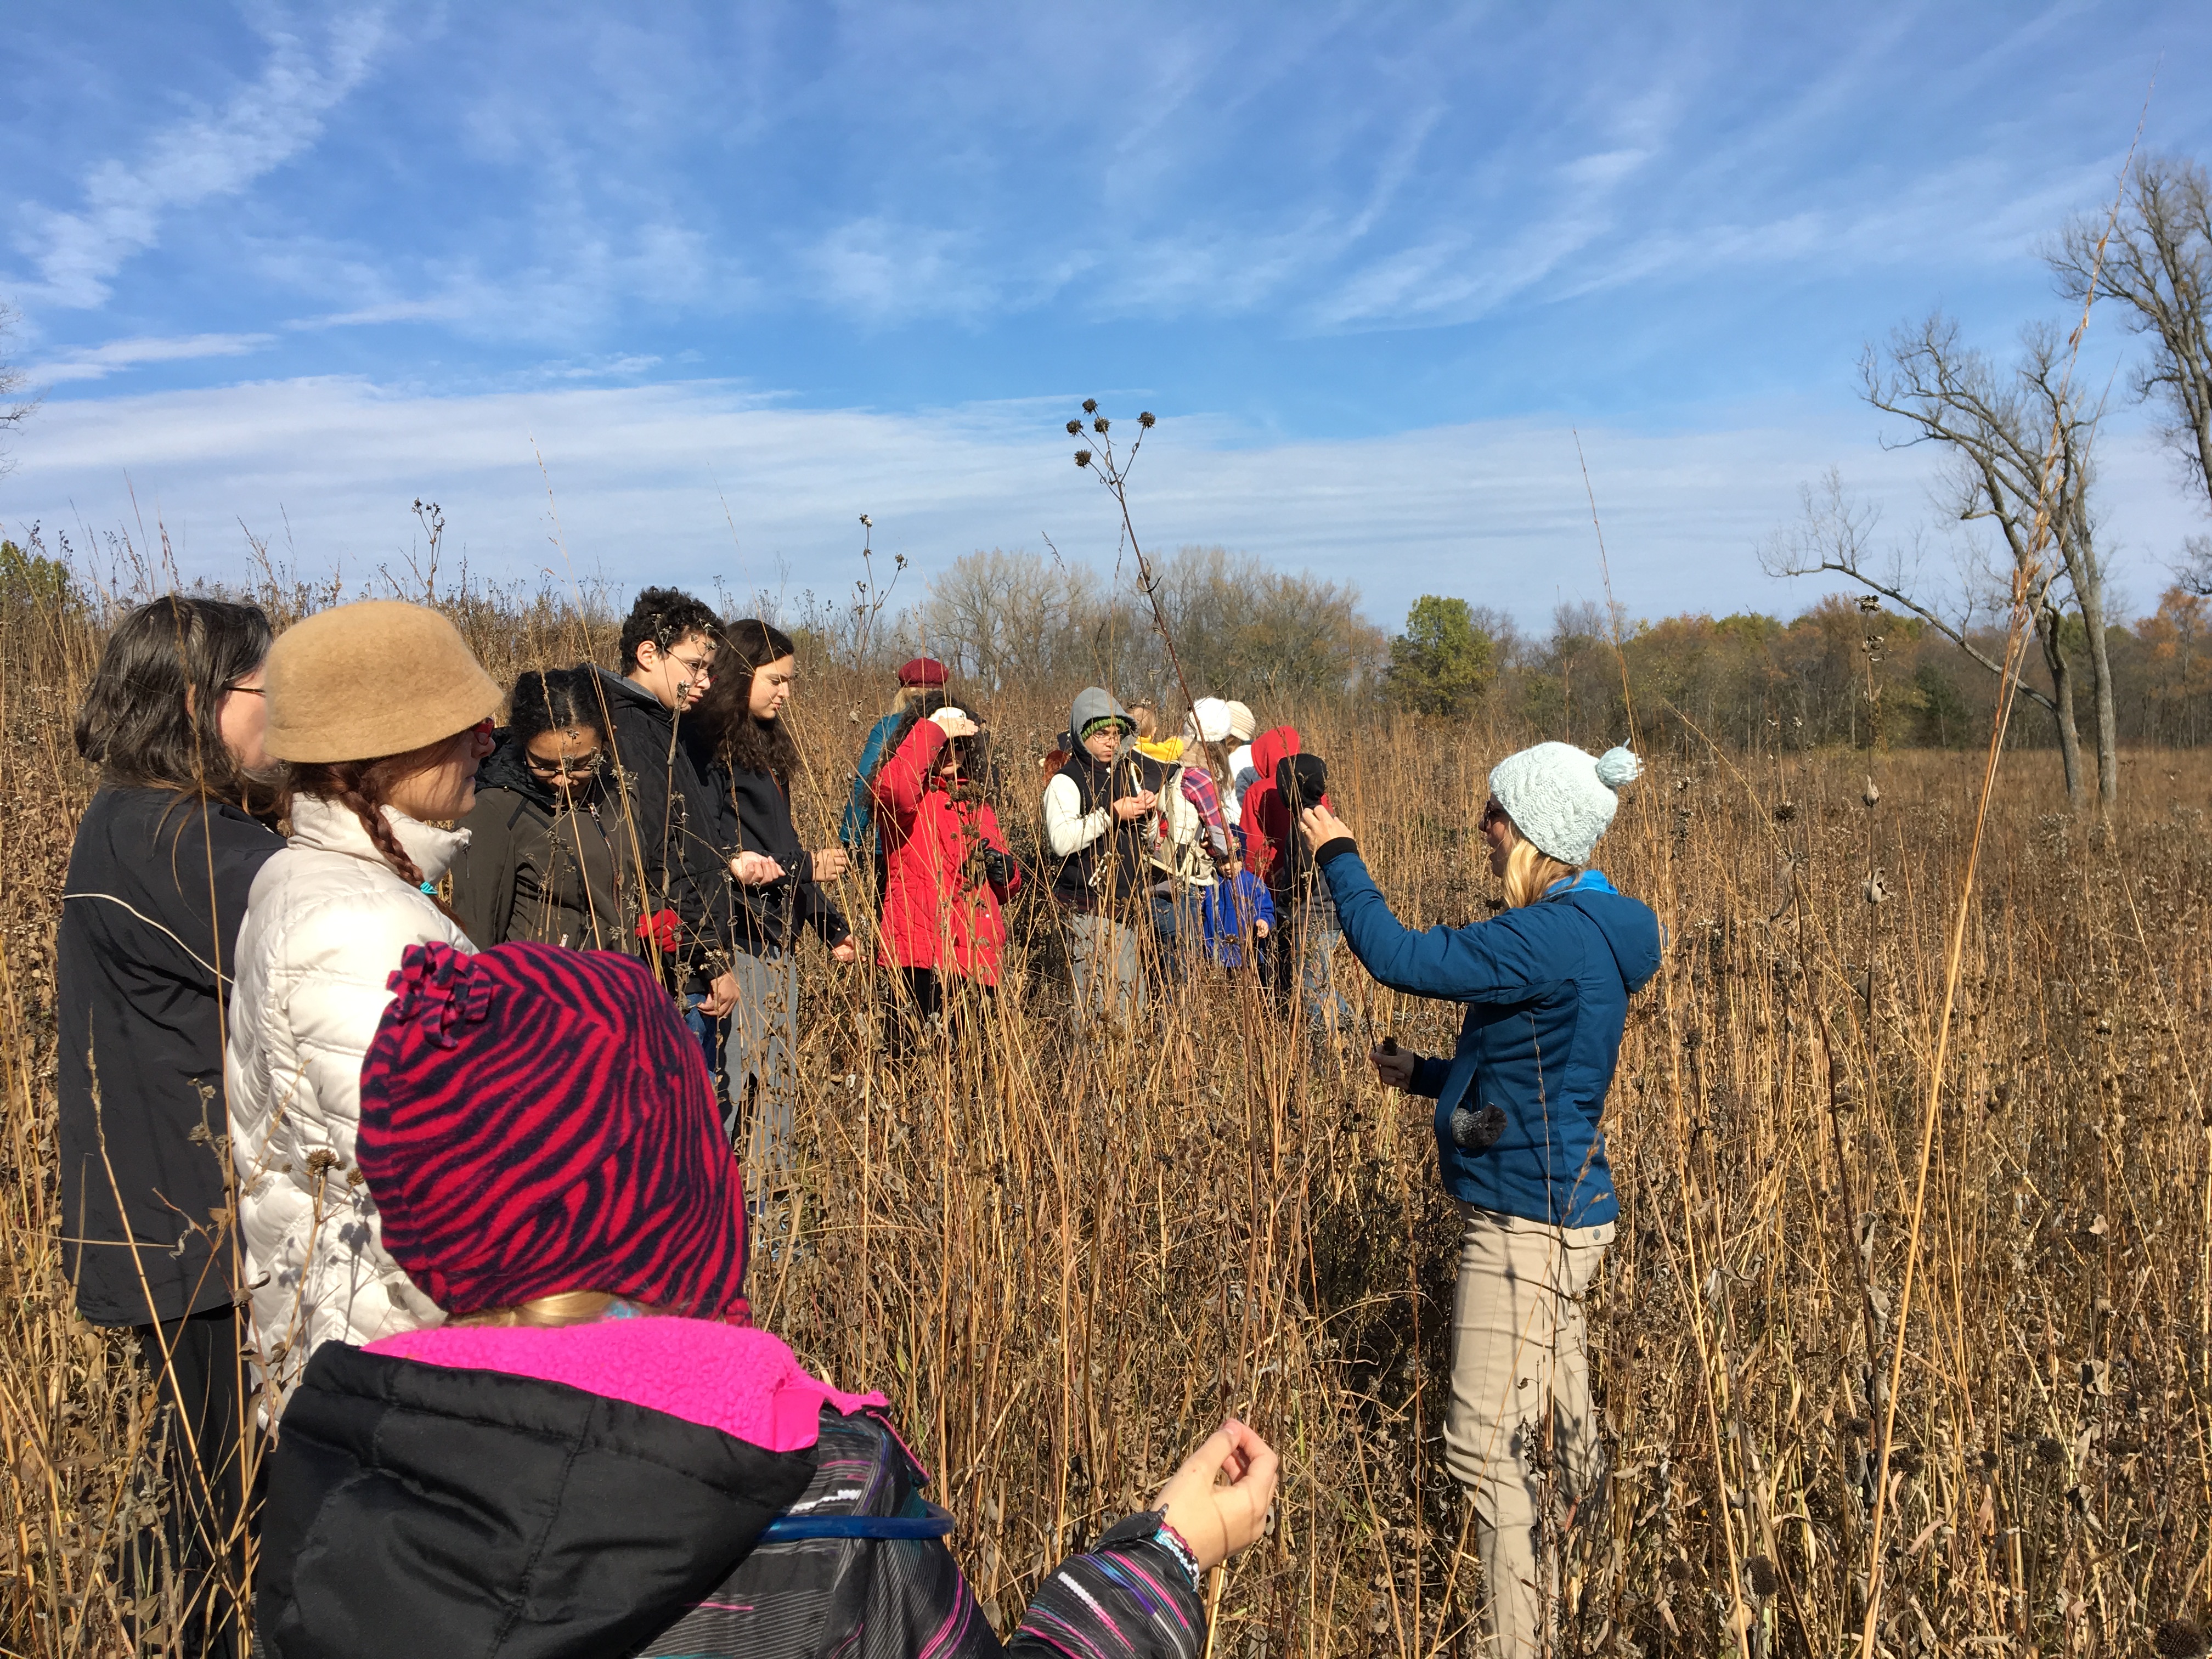 Naturalist talks to a group of people while exploring a prairie habitat in the fall.